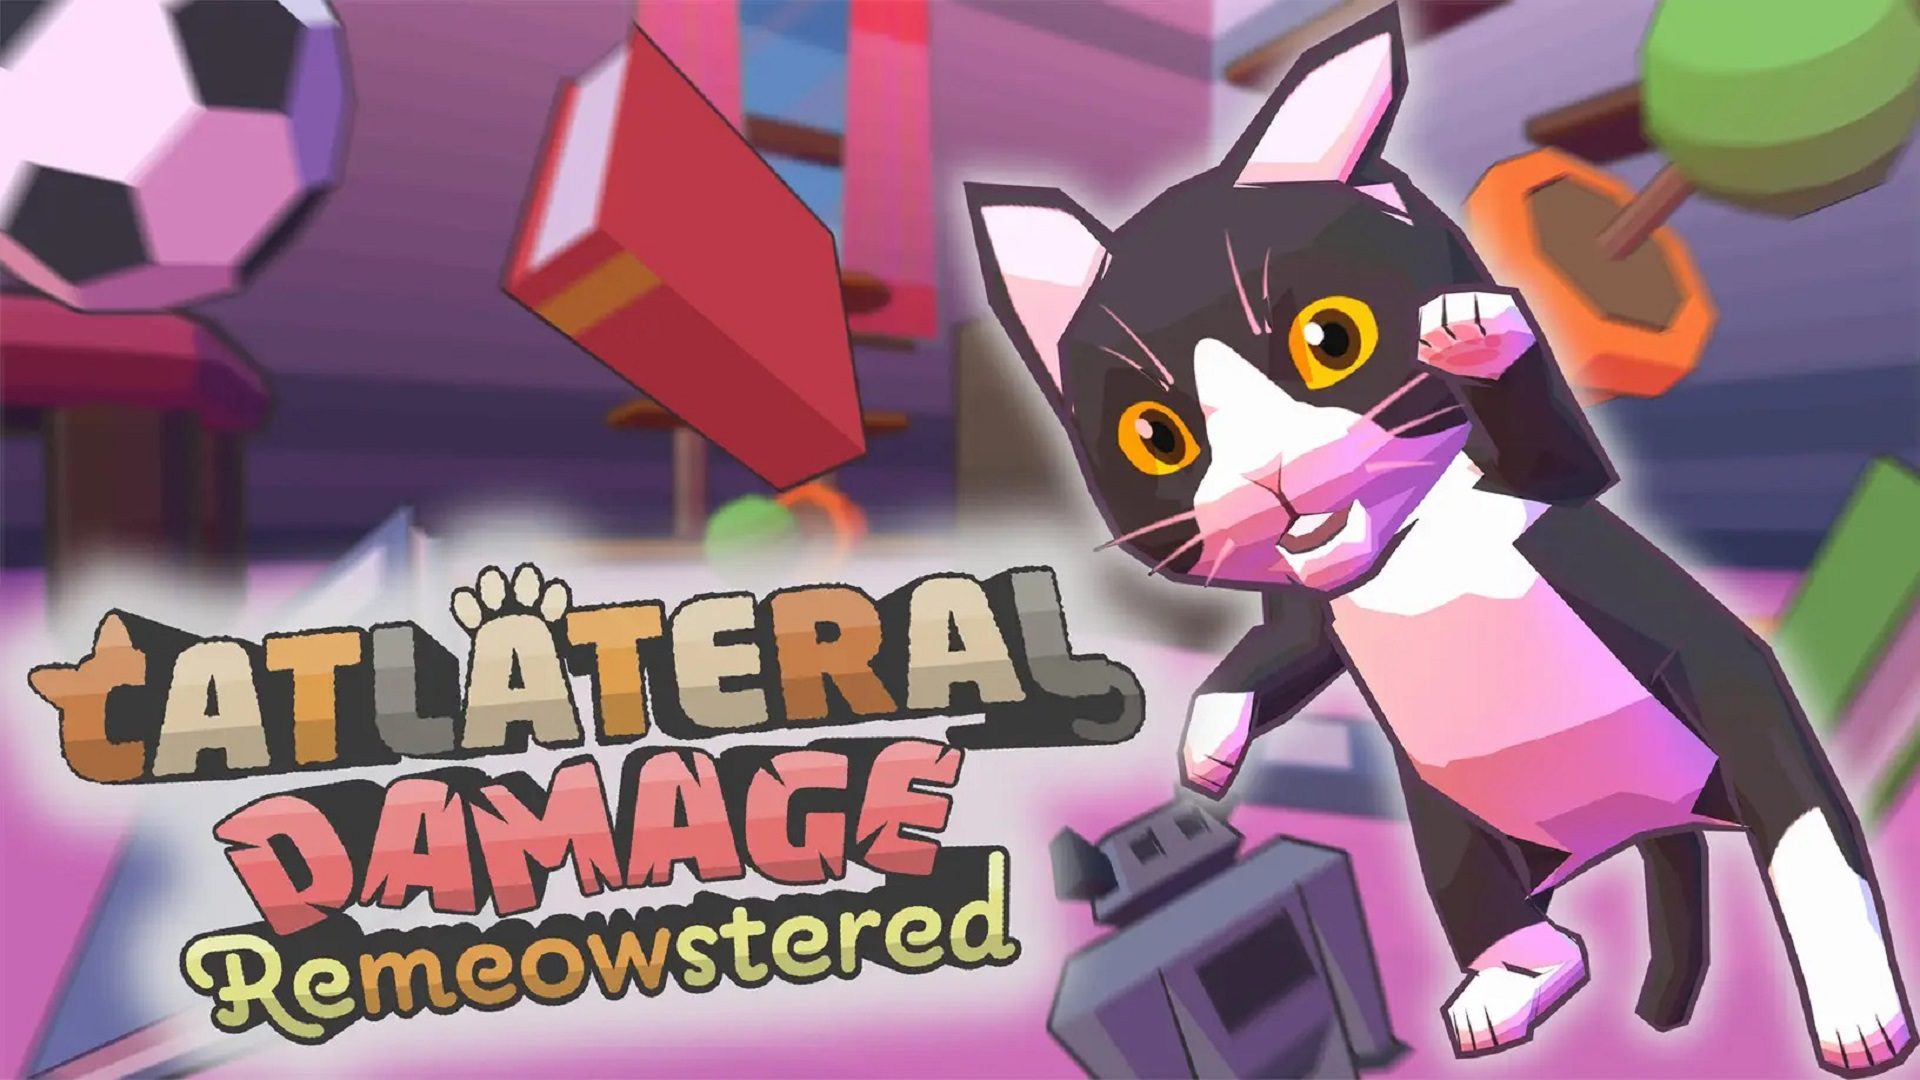 Catlateral Damage Remeowstered Claws its Way to PS5 and PS4 on September 15